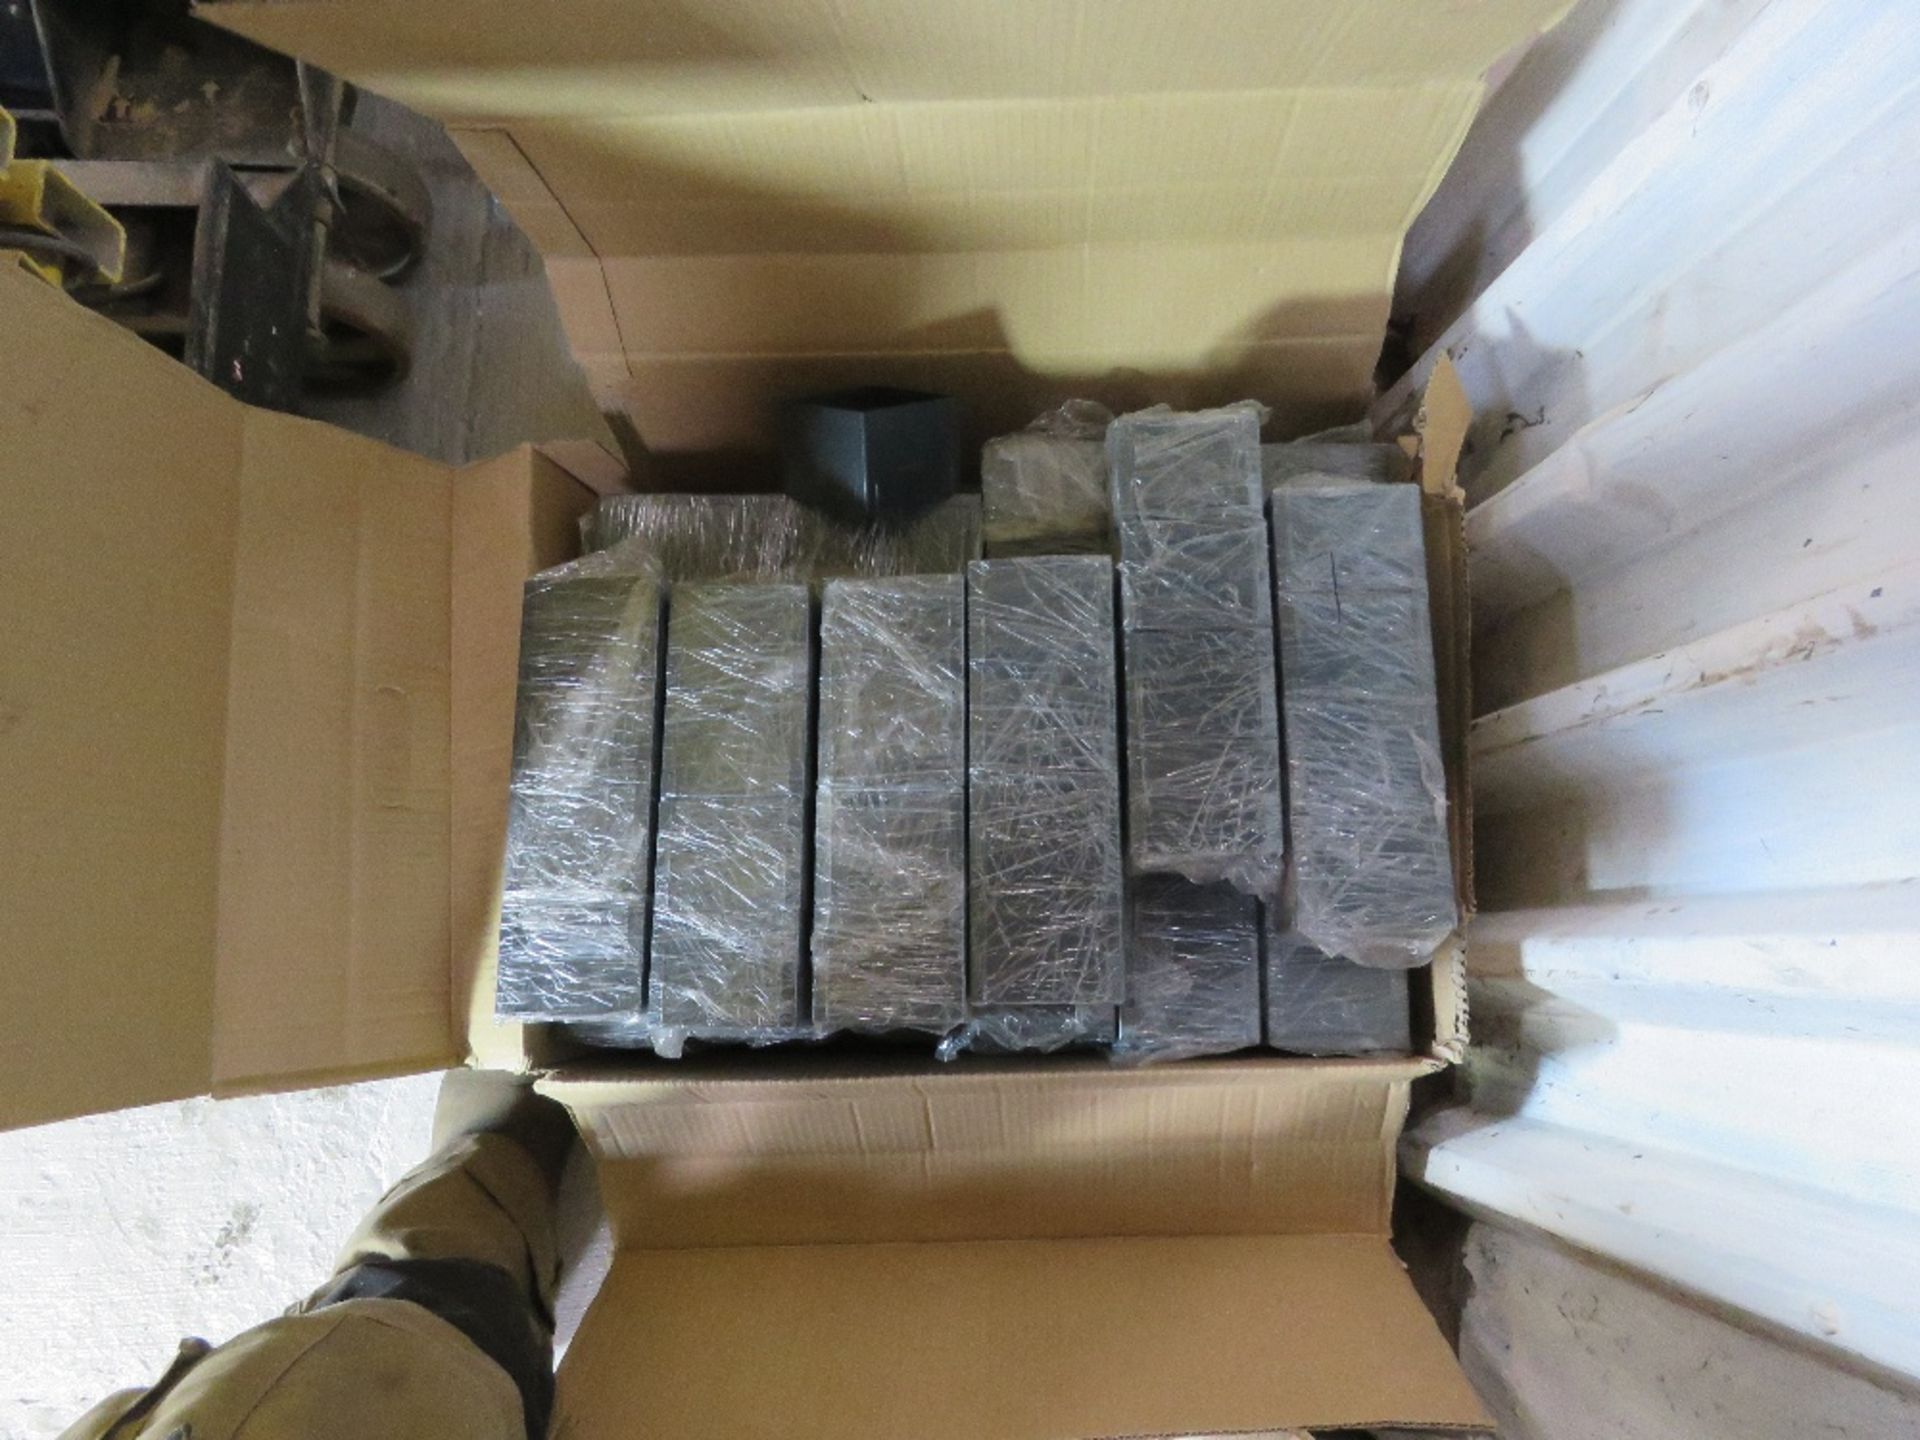 BOX OF METAL SOCKET/EXTENSION SQUARES. THIS LOT IS SOLD UNDER THE AUCTIONEERS MARGIN SCHEME, THEREFO